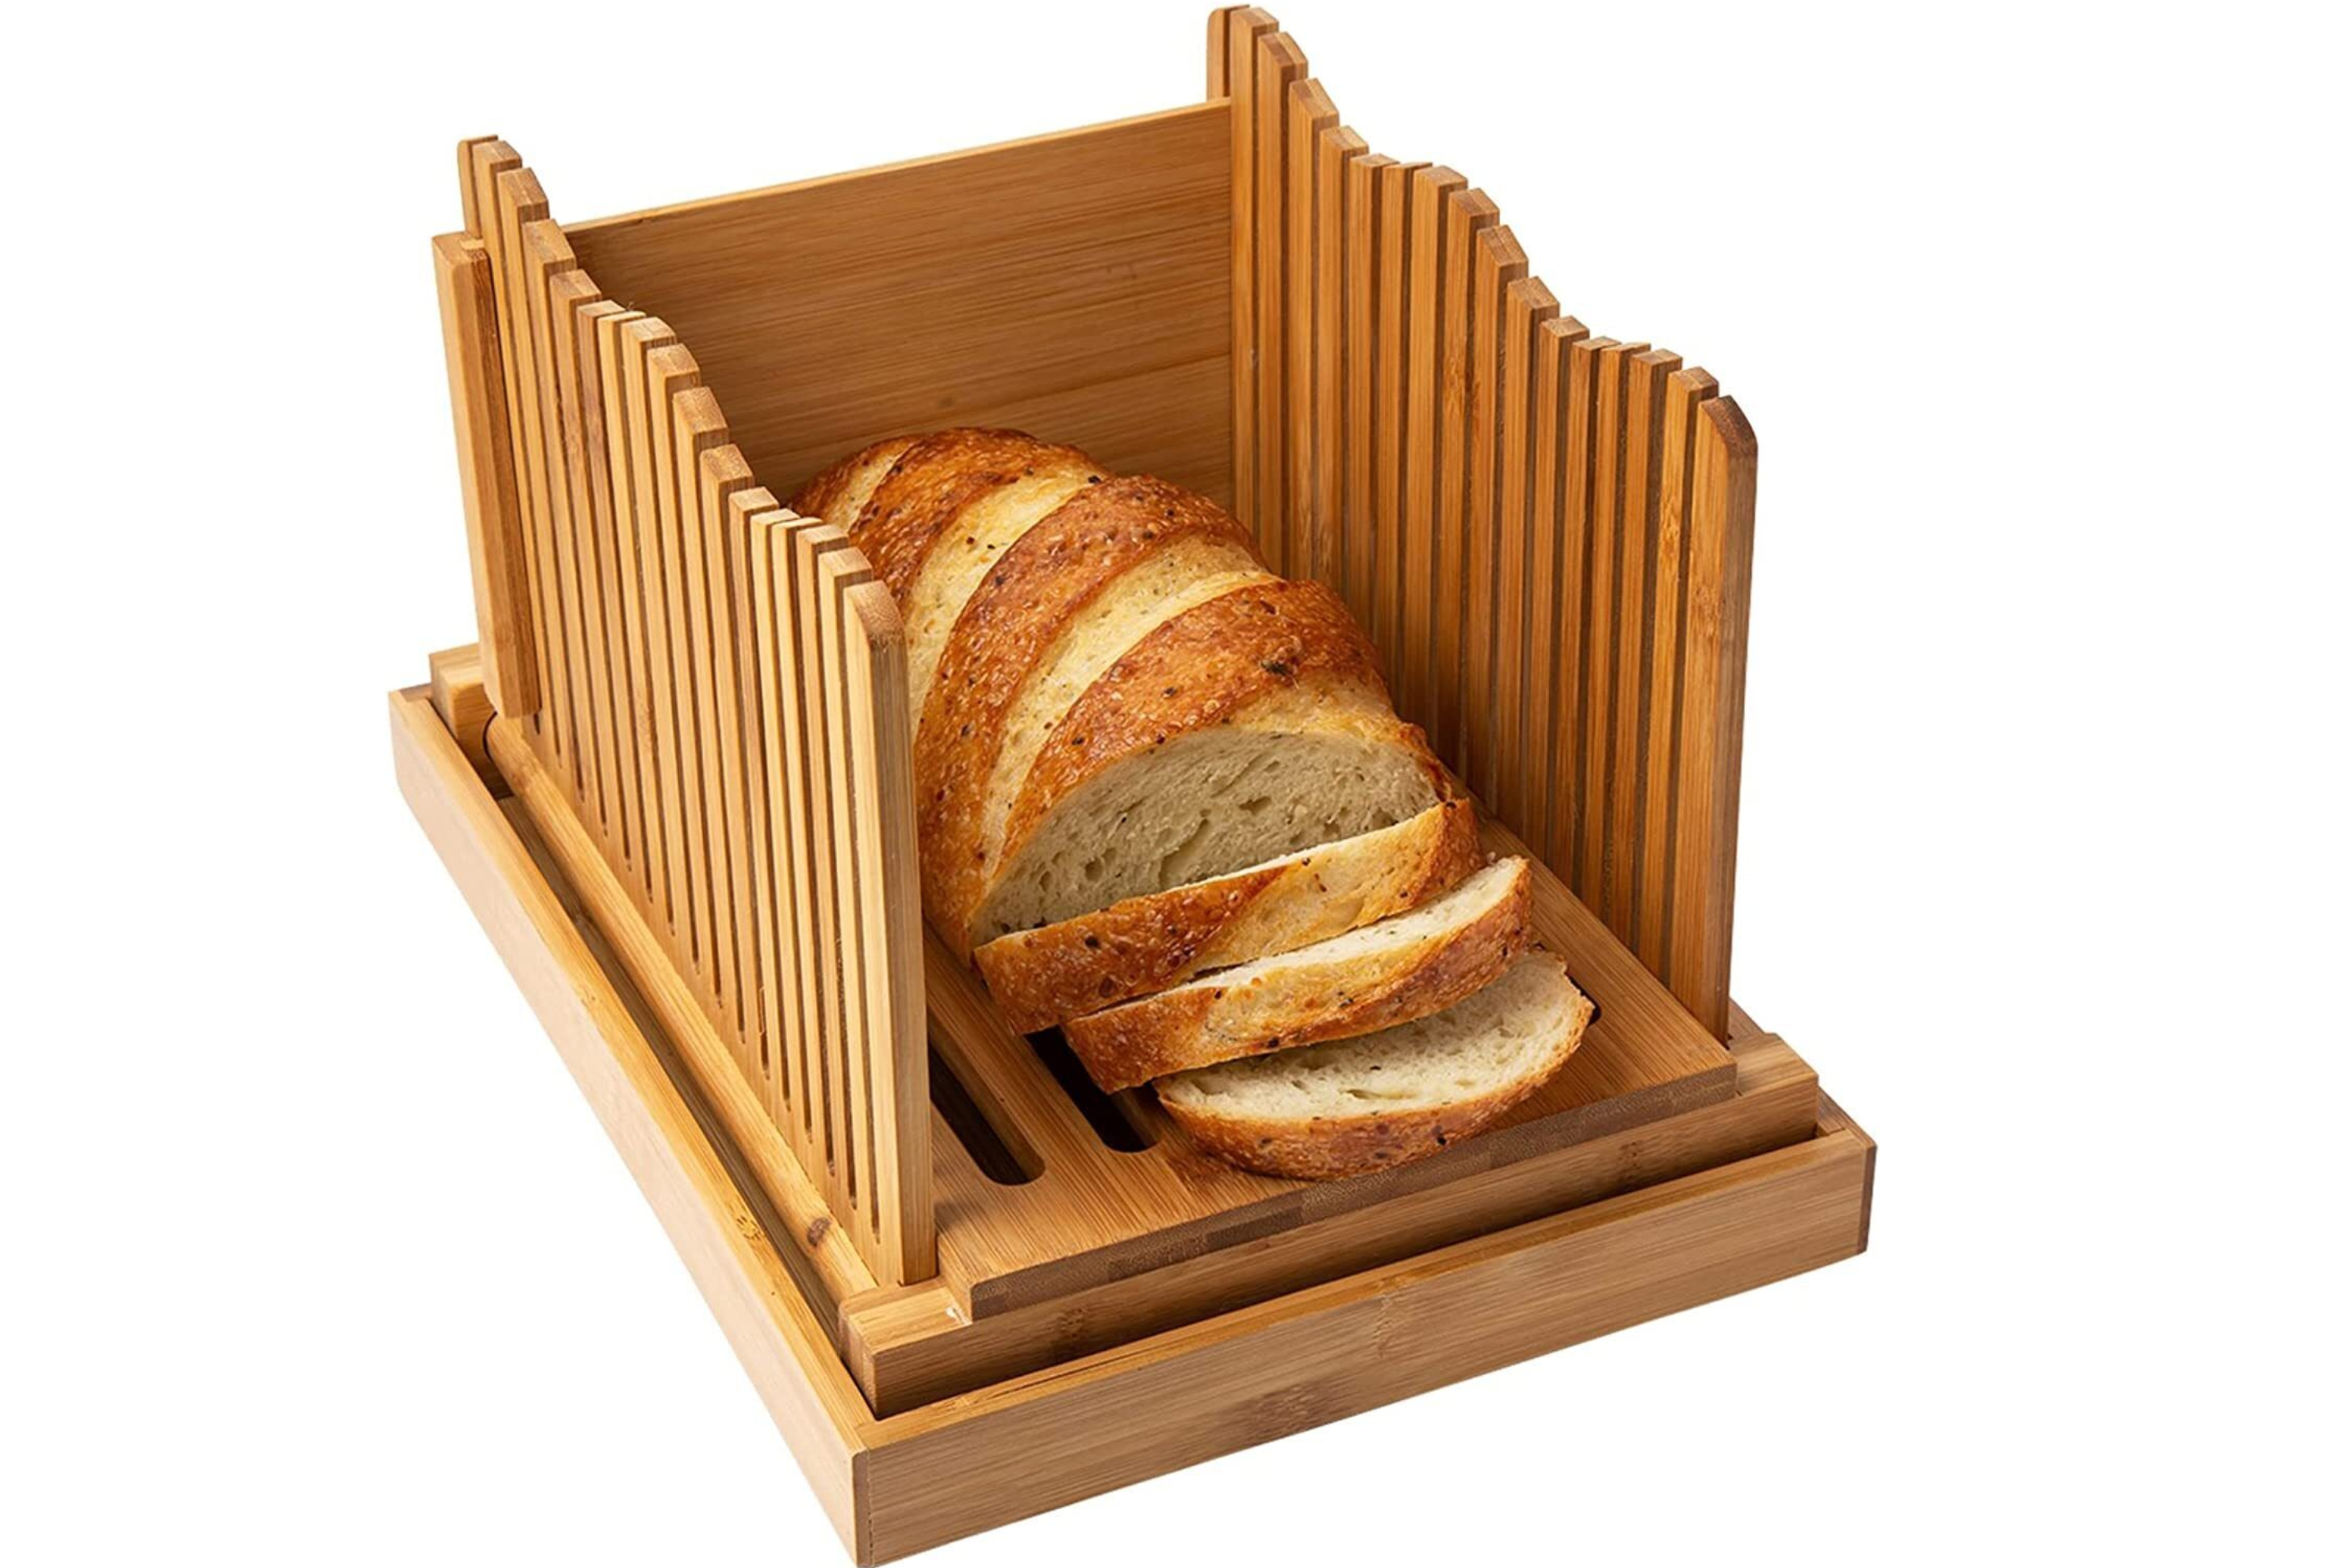 This is also loaf number 10 if you were counting., bread slicer